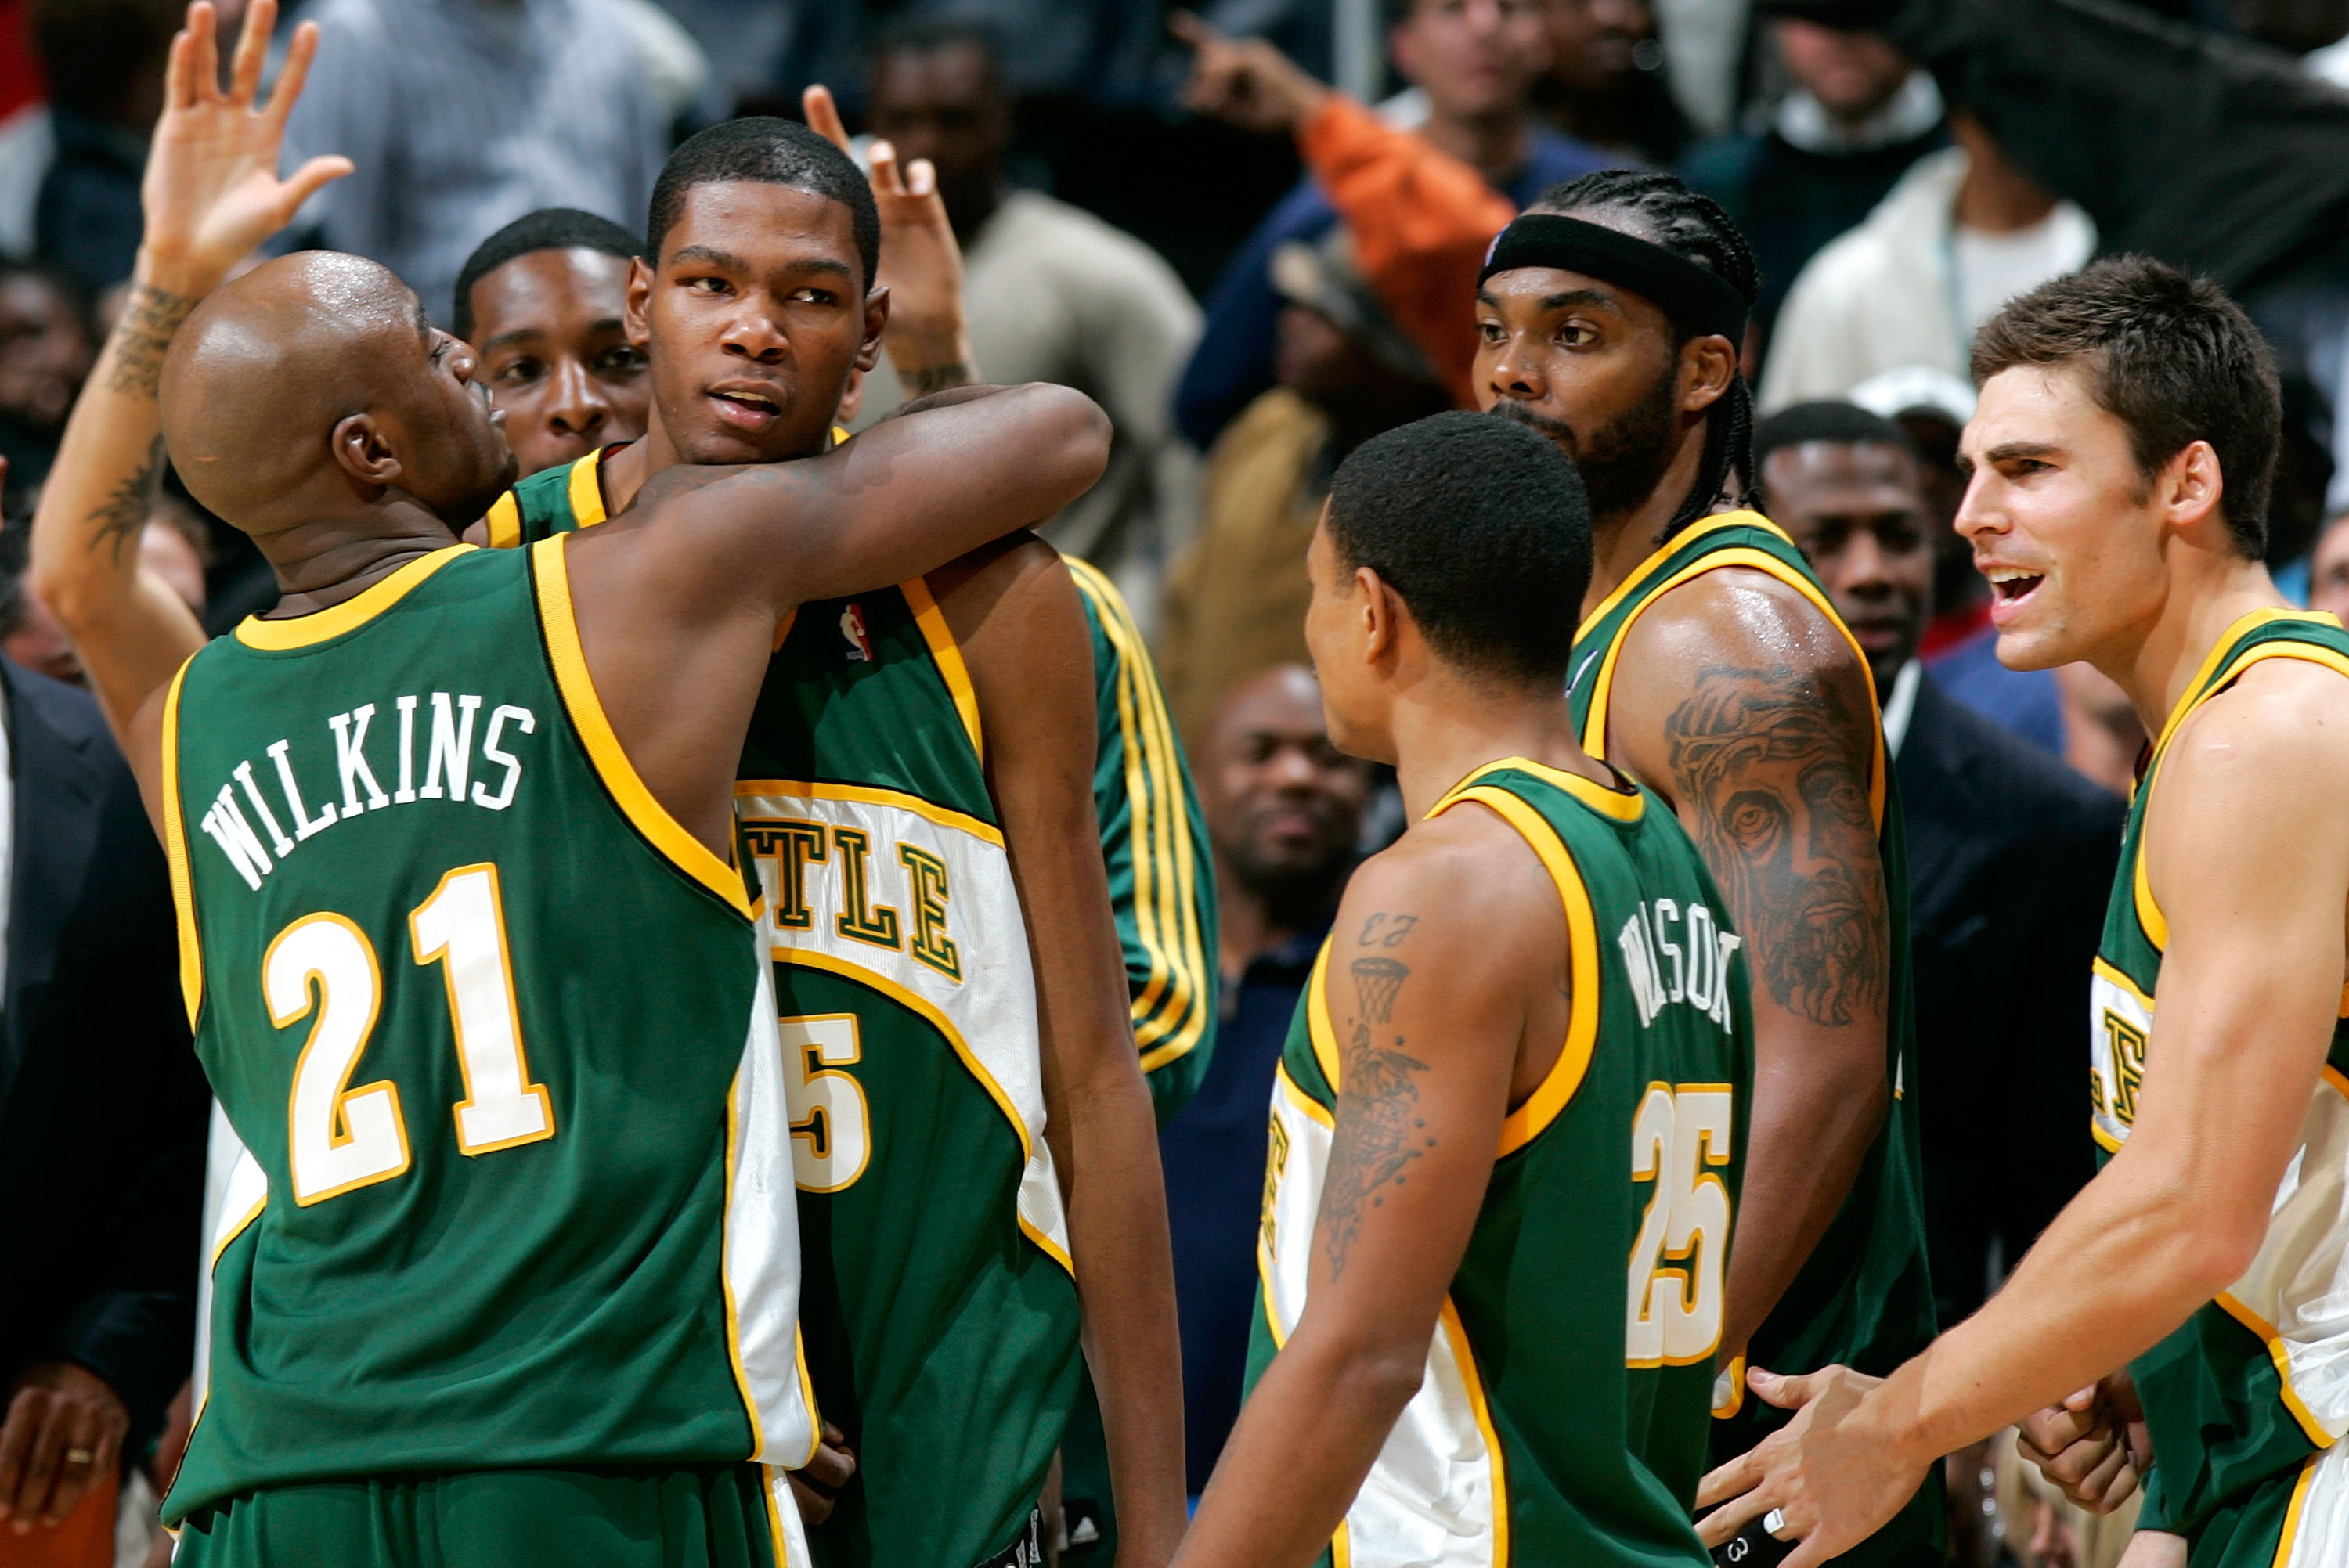 The last two Sonics players in the NBA will meet in the Finals